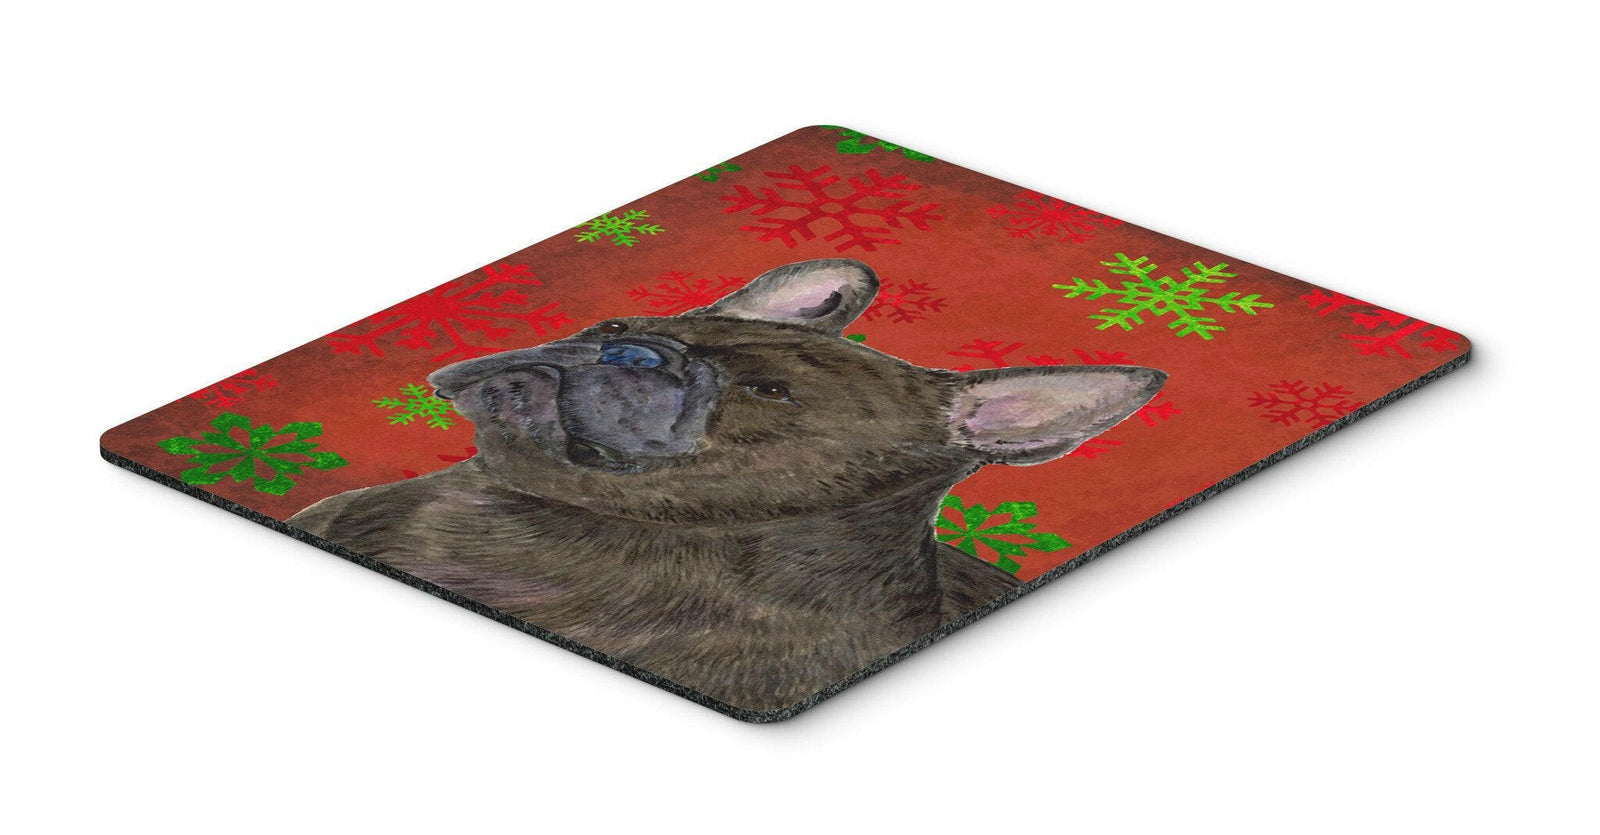 French Bulldog Red and Green Snowflakes Christmas Mouse Pad, Hot Pad or Trivet by Caroline's Treasures